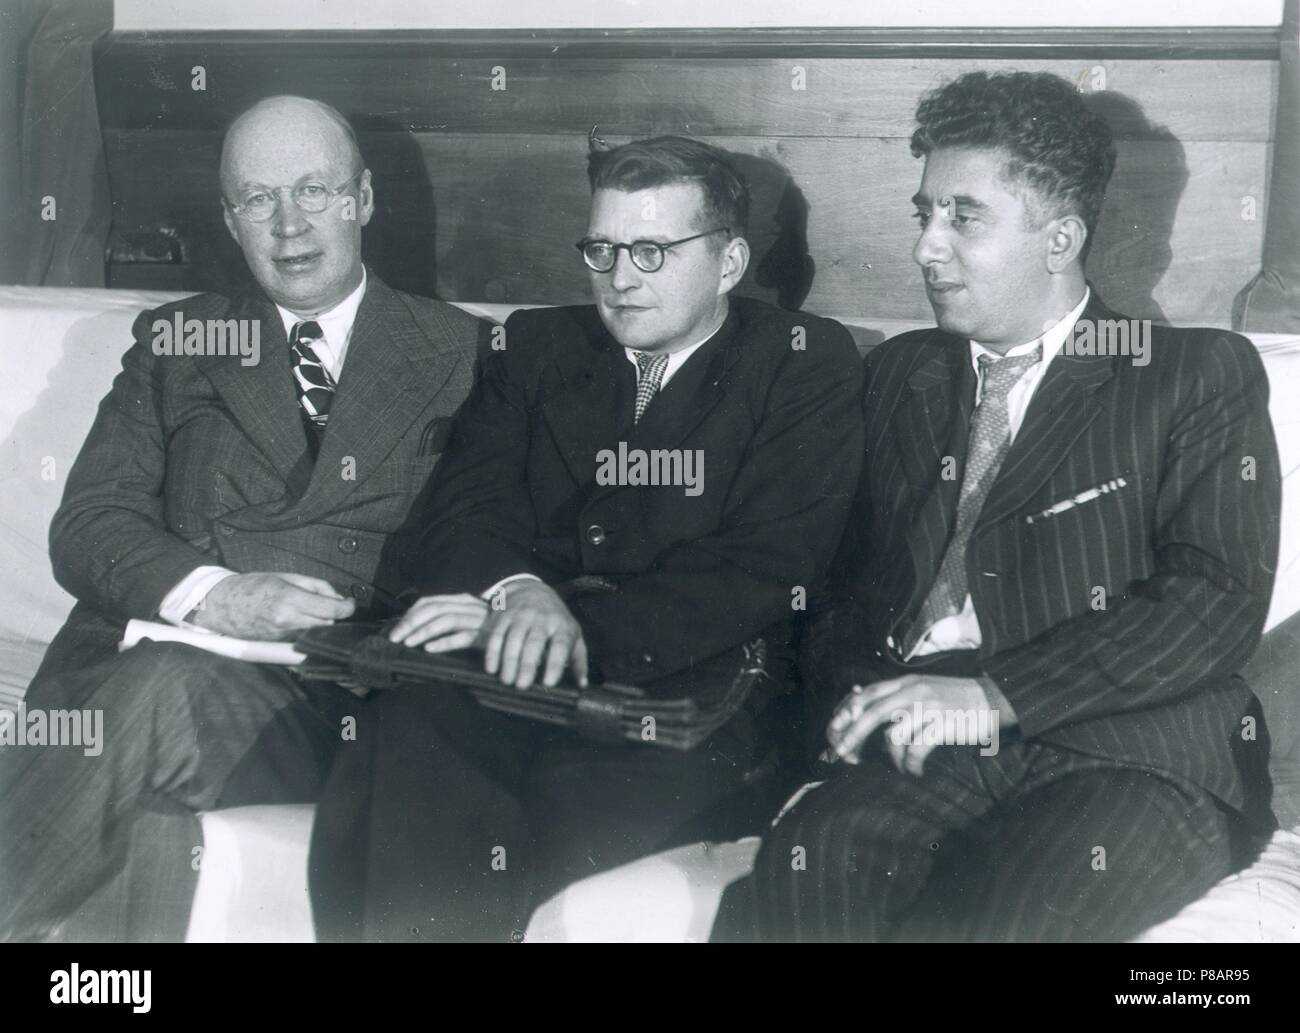 The Composers Sergei Prokofiev (1891-1953), Dmitri Shostakovich (1906-1975) and Aram Khachaturian (1903-1978). Museum: Russian State Archive of Literature and Art, Moscow. Stock Photo